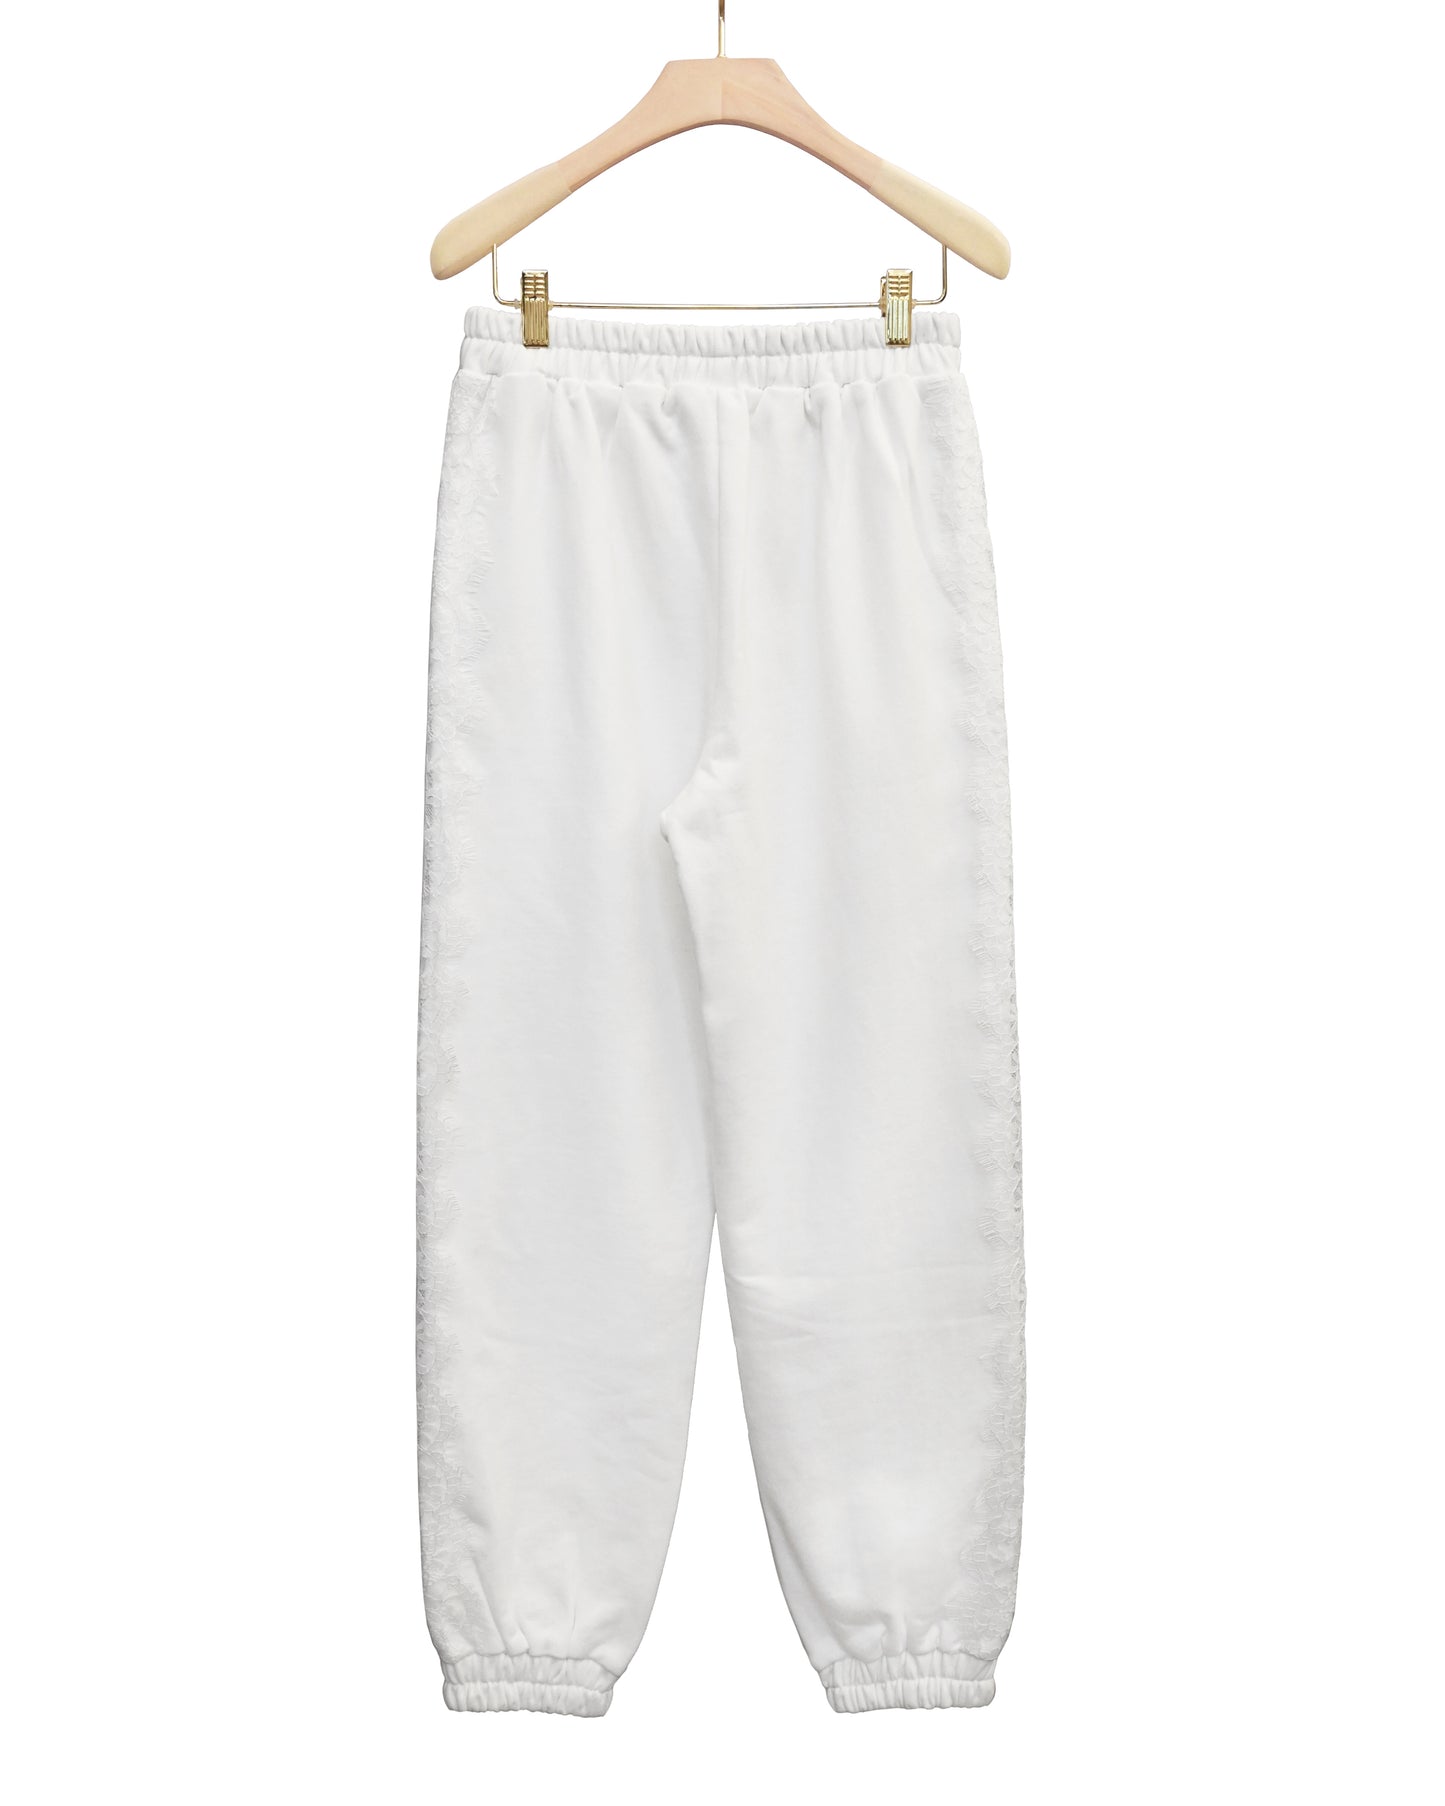 aalis ARNA side lace trim track pants (White)